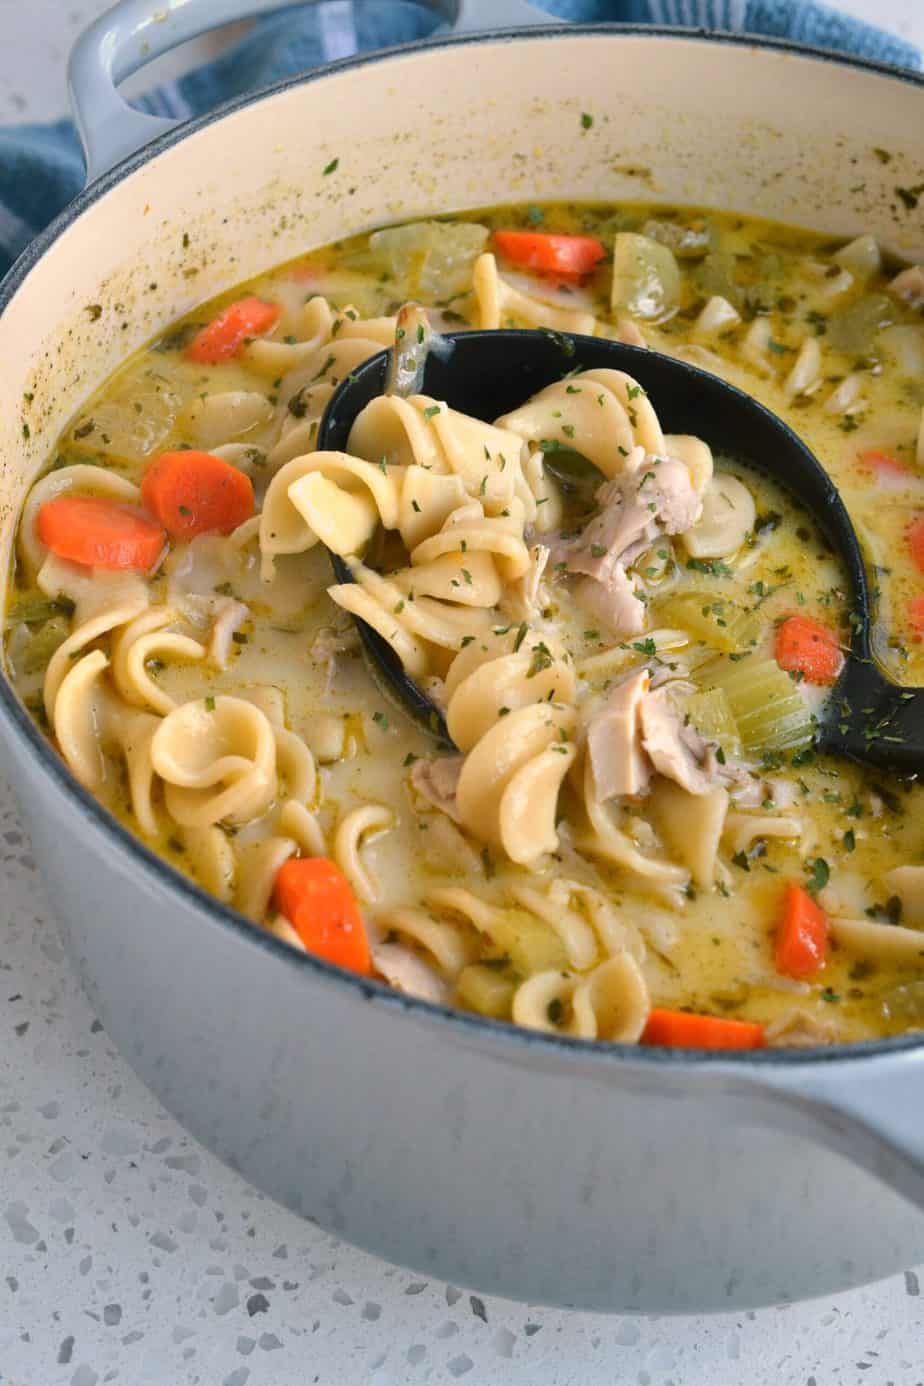 How to make Chicken Noodle Soup